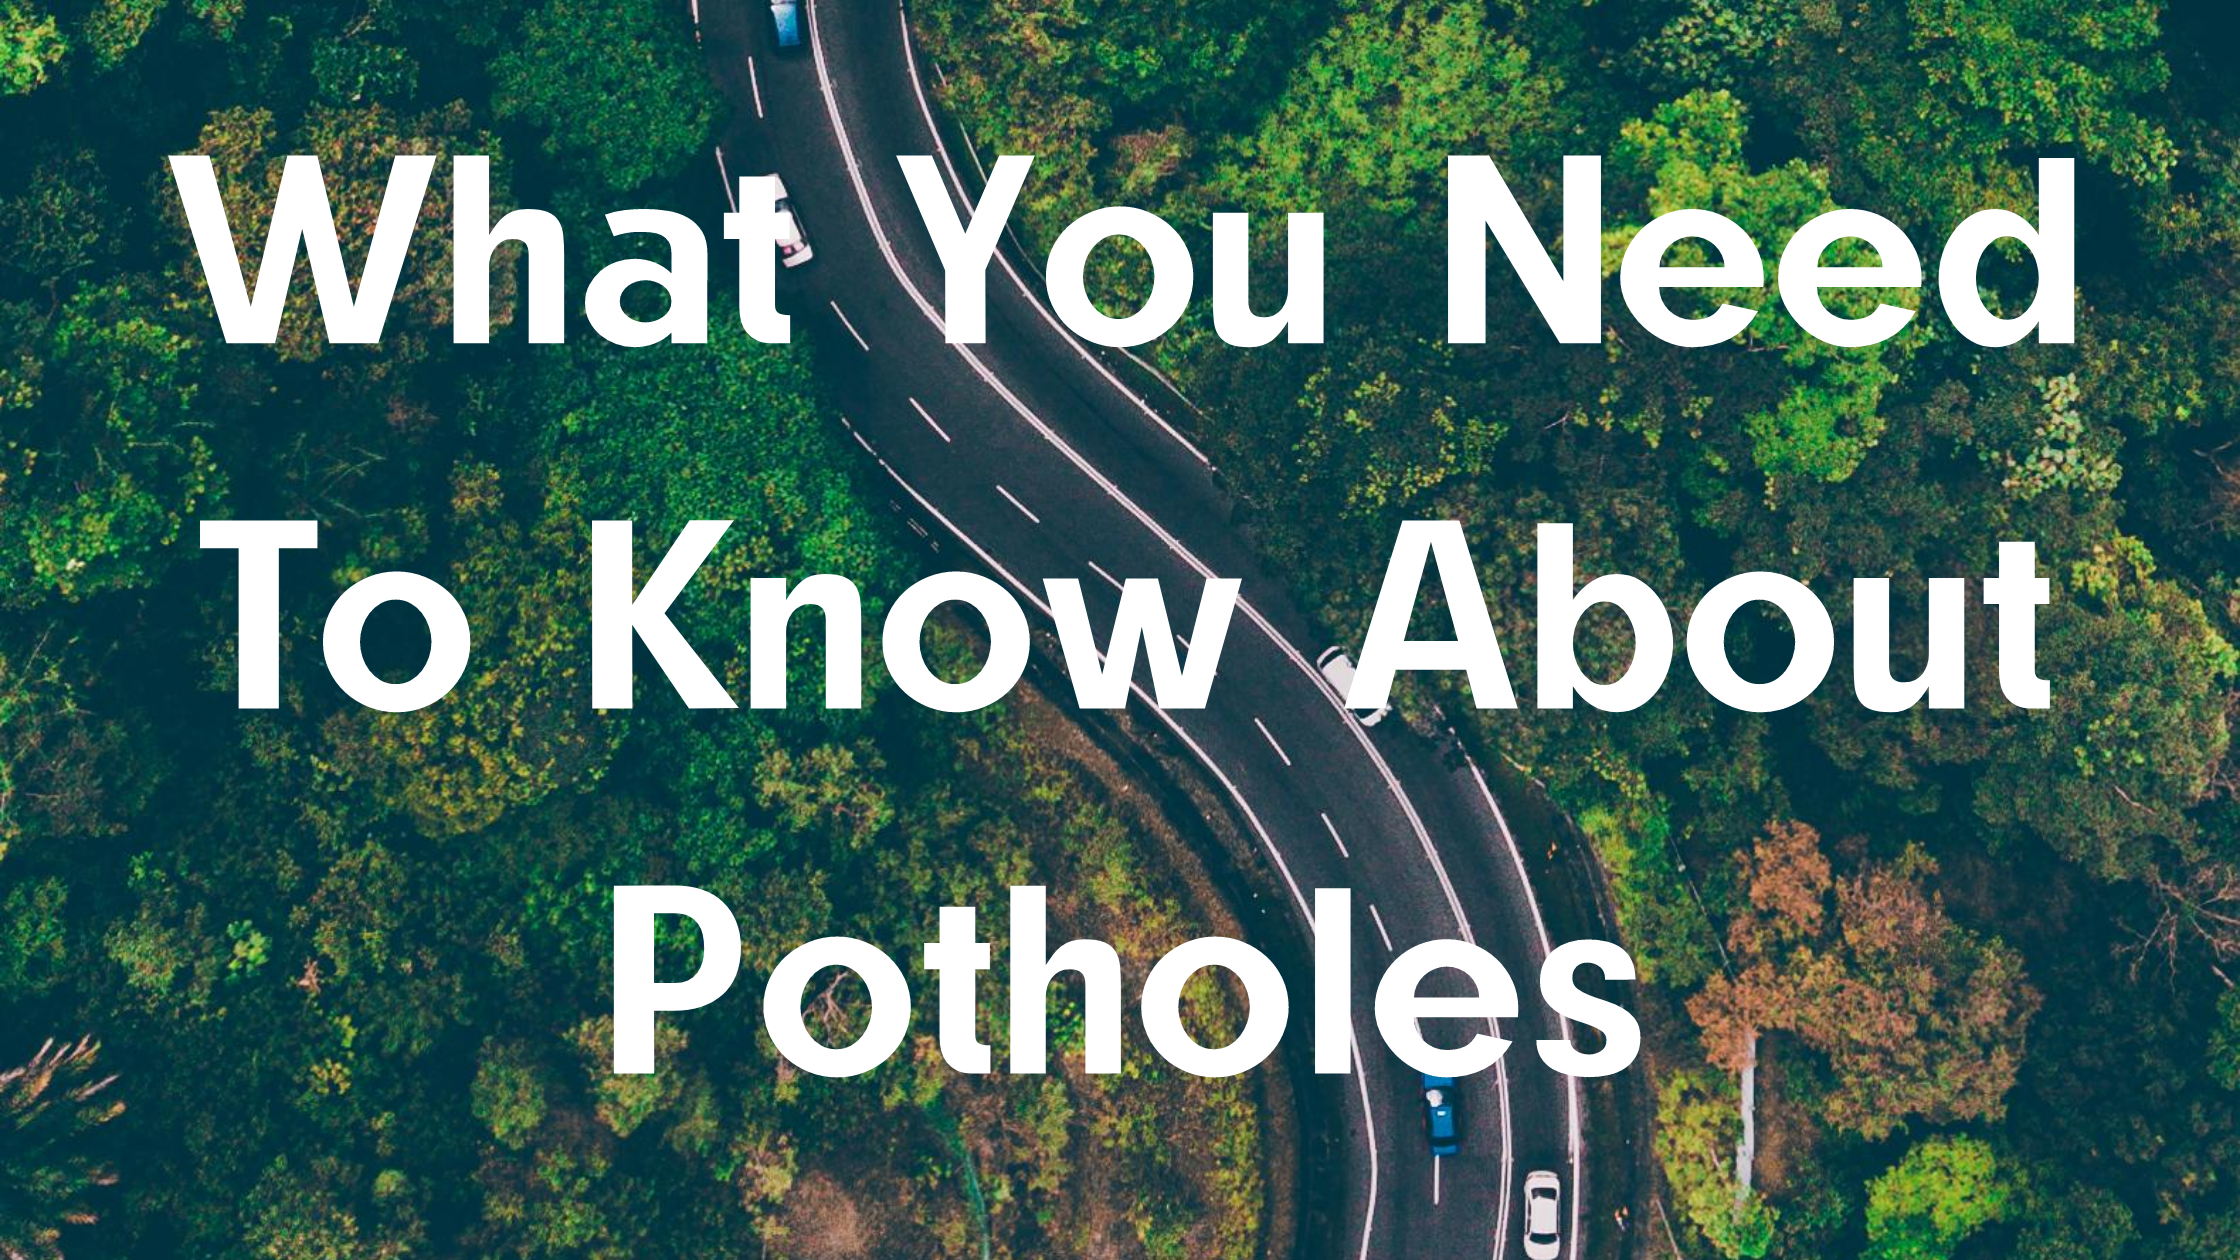 An image of a winding road with trees on either side with the text: What You Need To Know About Potholes